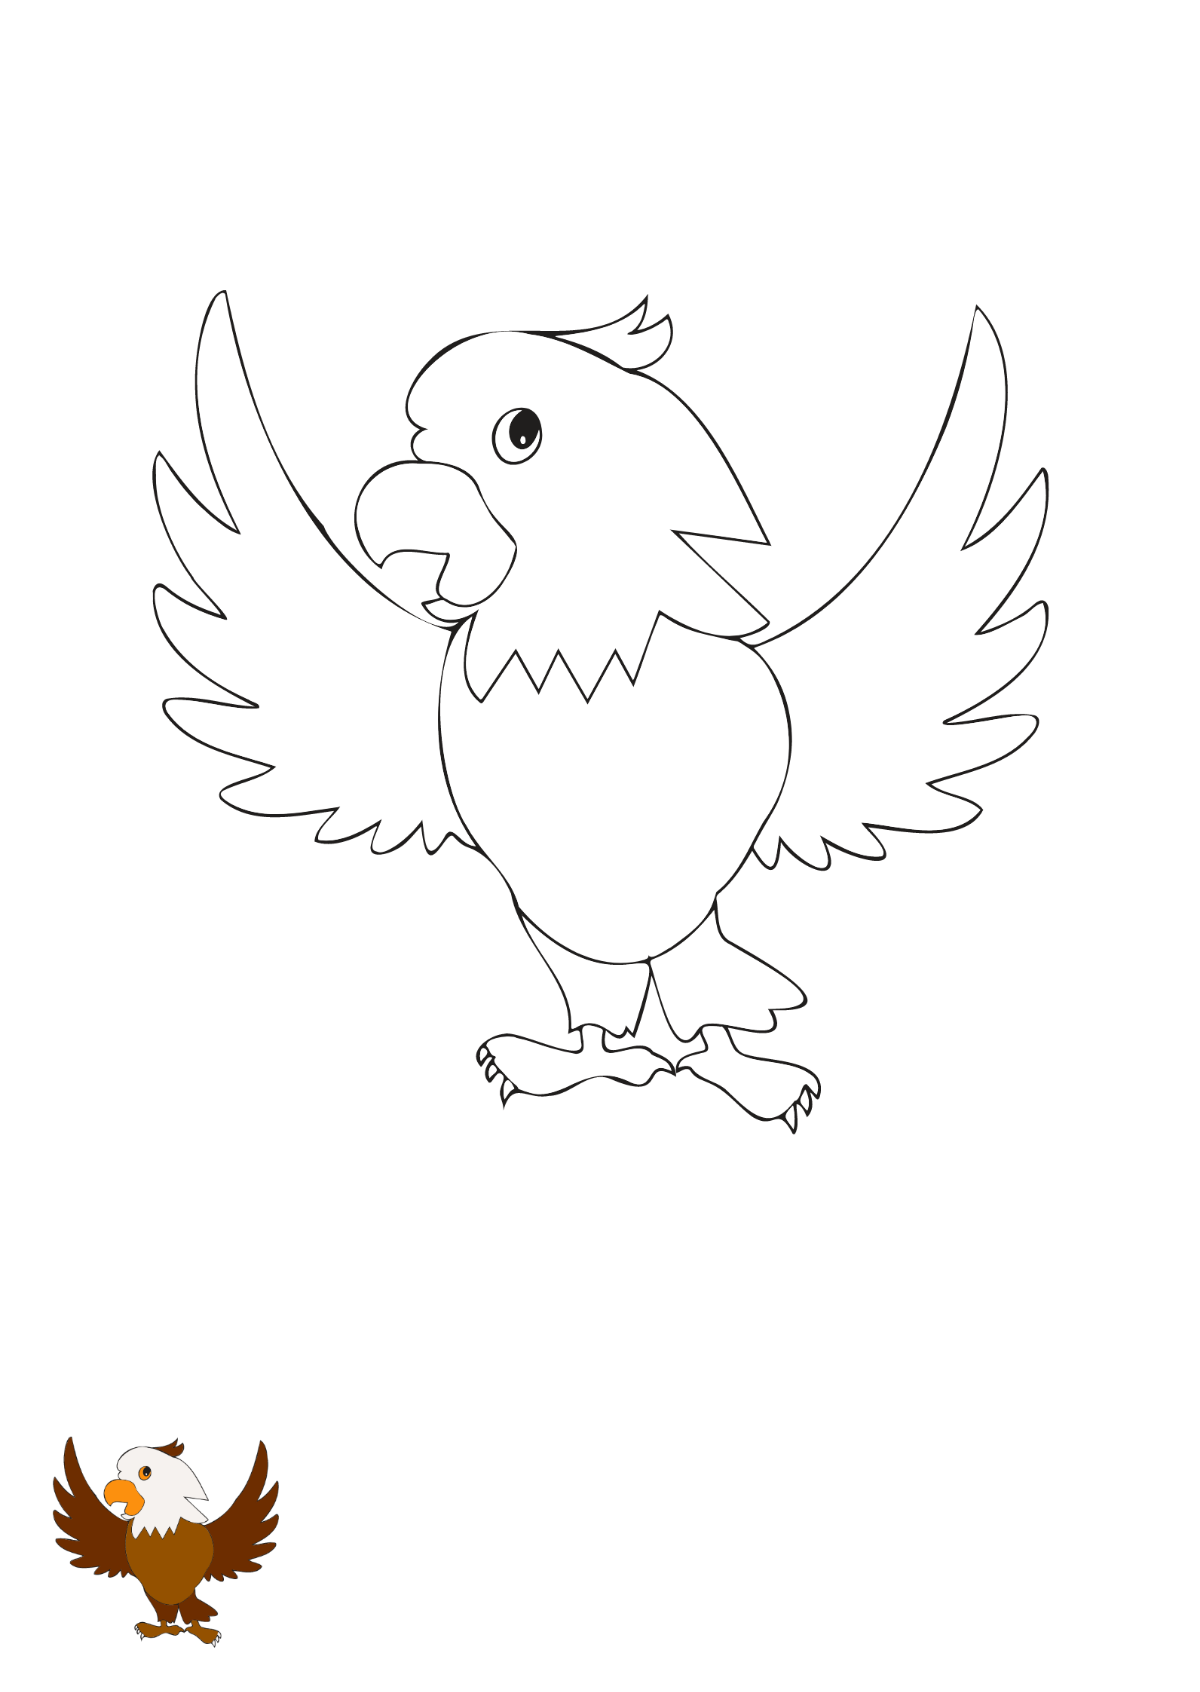 Cartoon Eagle coloring page Template